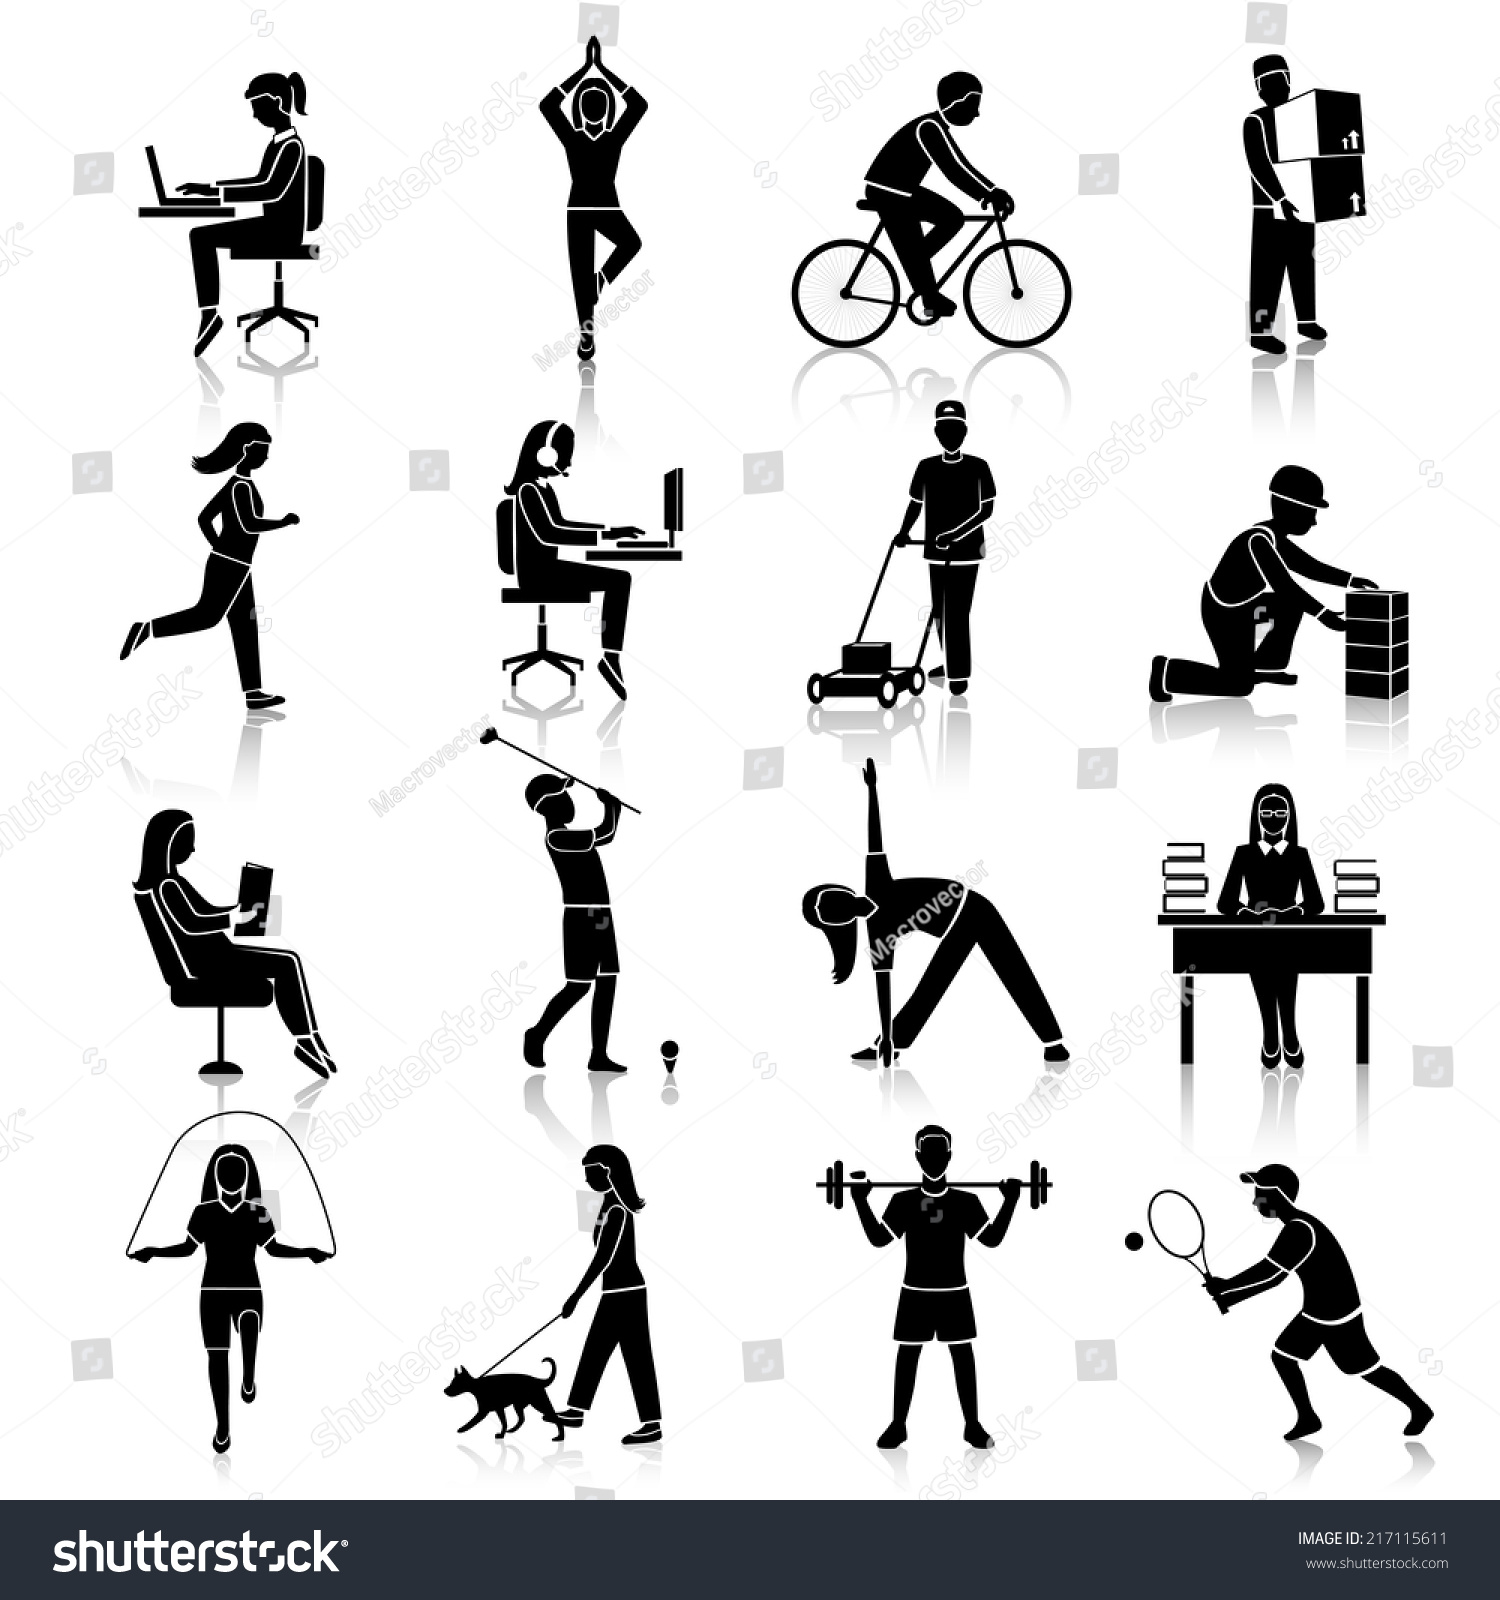 physical fitness clipart - photo #47